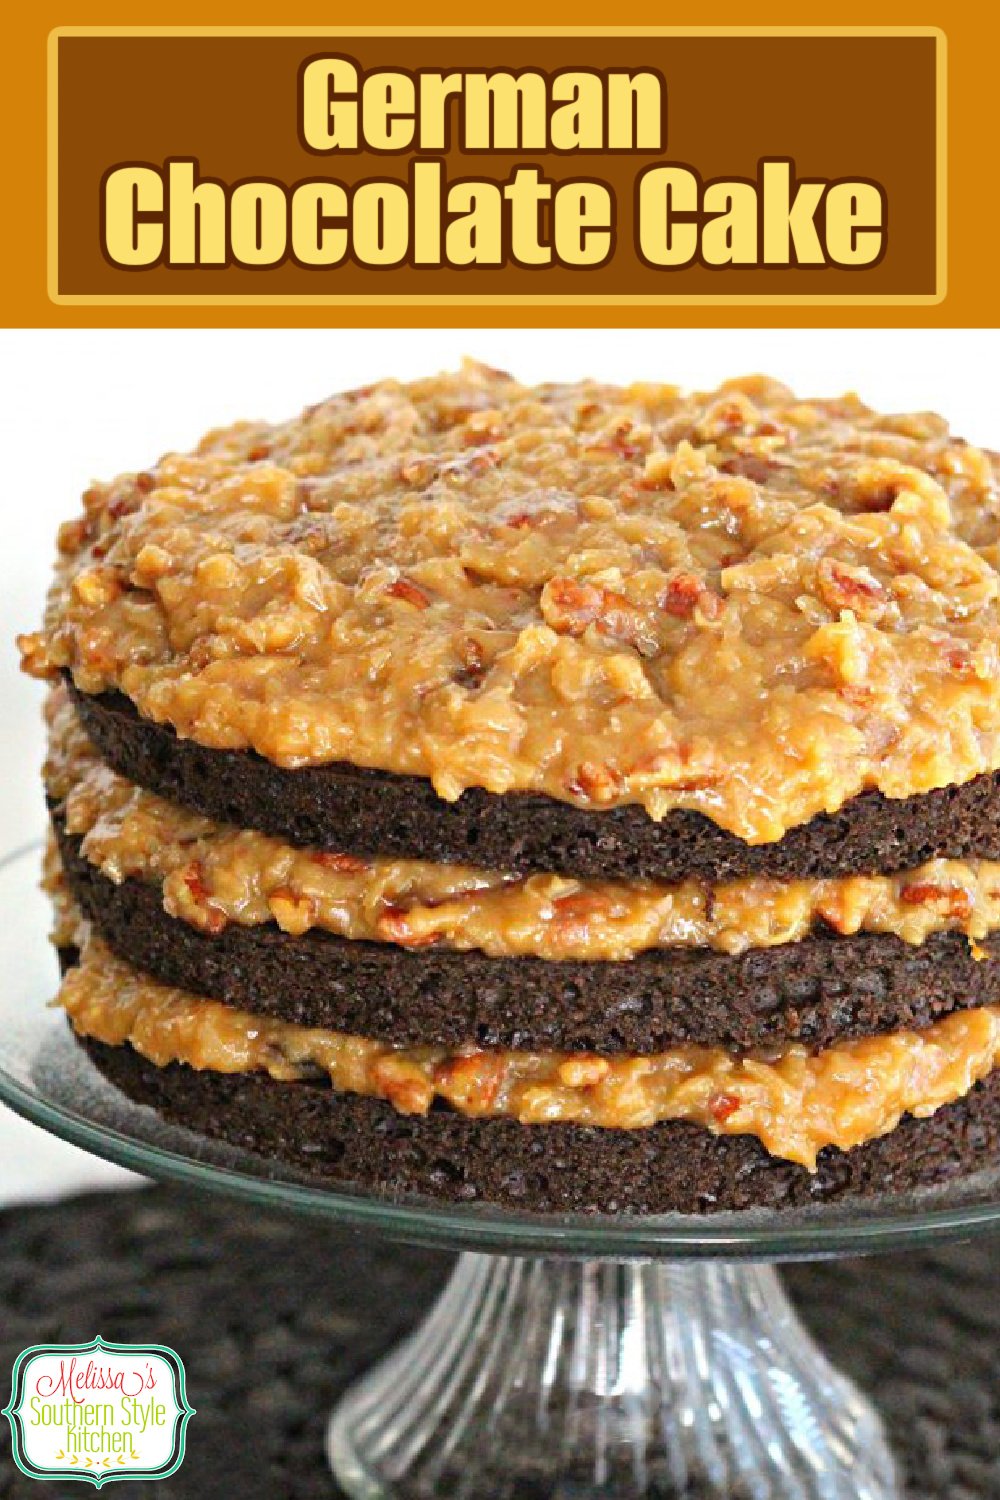 This recipe for German Chocolate Cake is a classic that everybody needs on their desserts menu #germanchocolatecake #chocolatecake #chocolate #cakerecipes #cakes #desserts #dessertfoodrecipes #southernrecipes #southernfood #holidayrecipes via @melissasssk